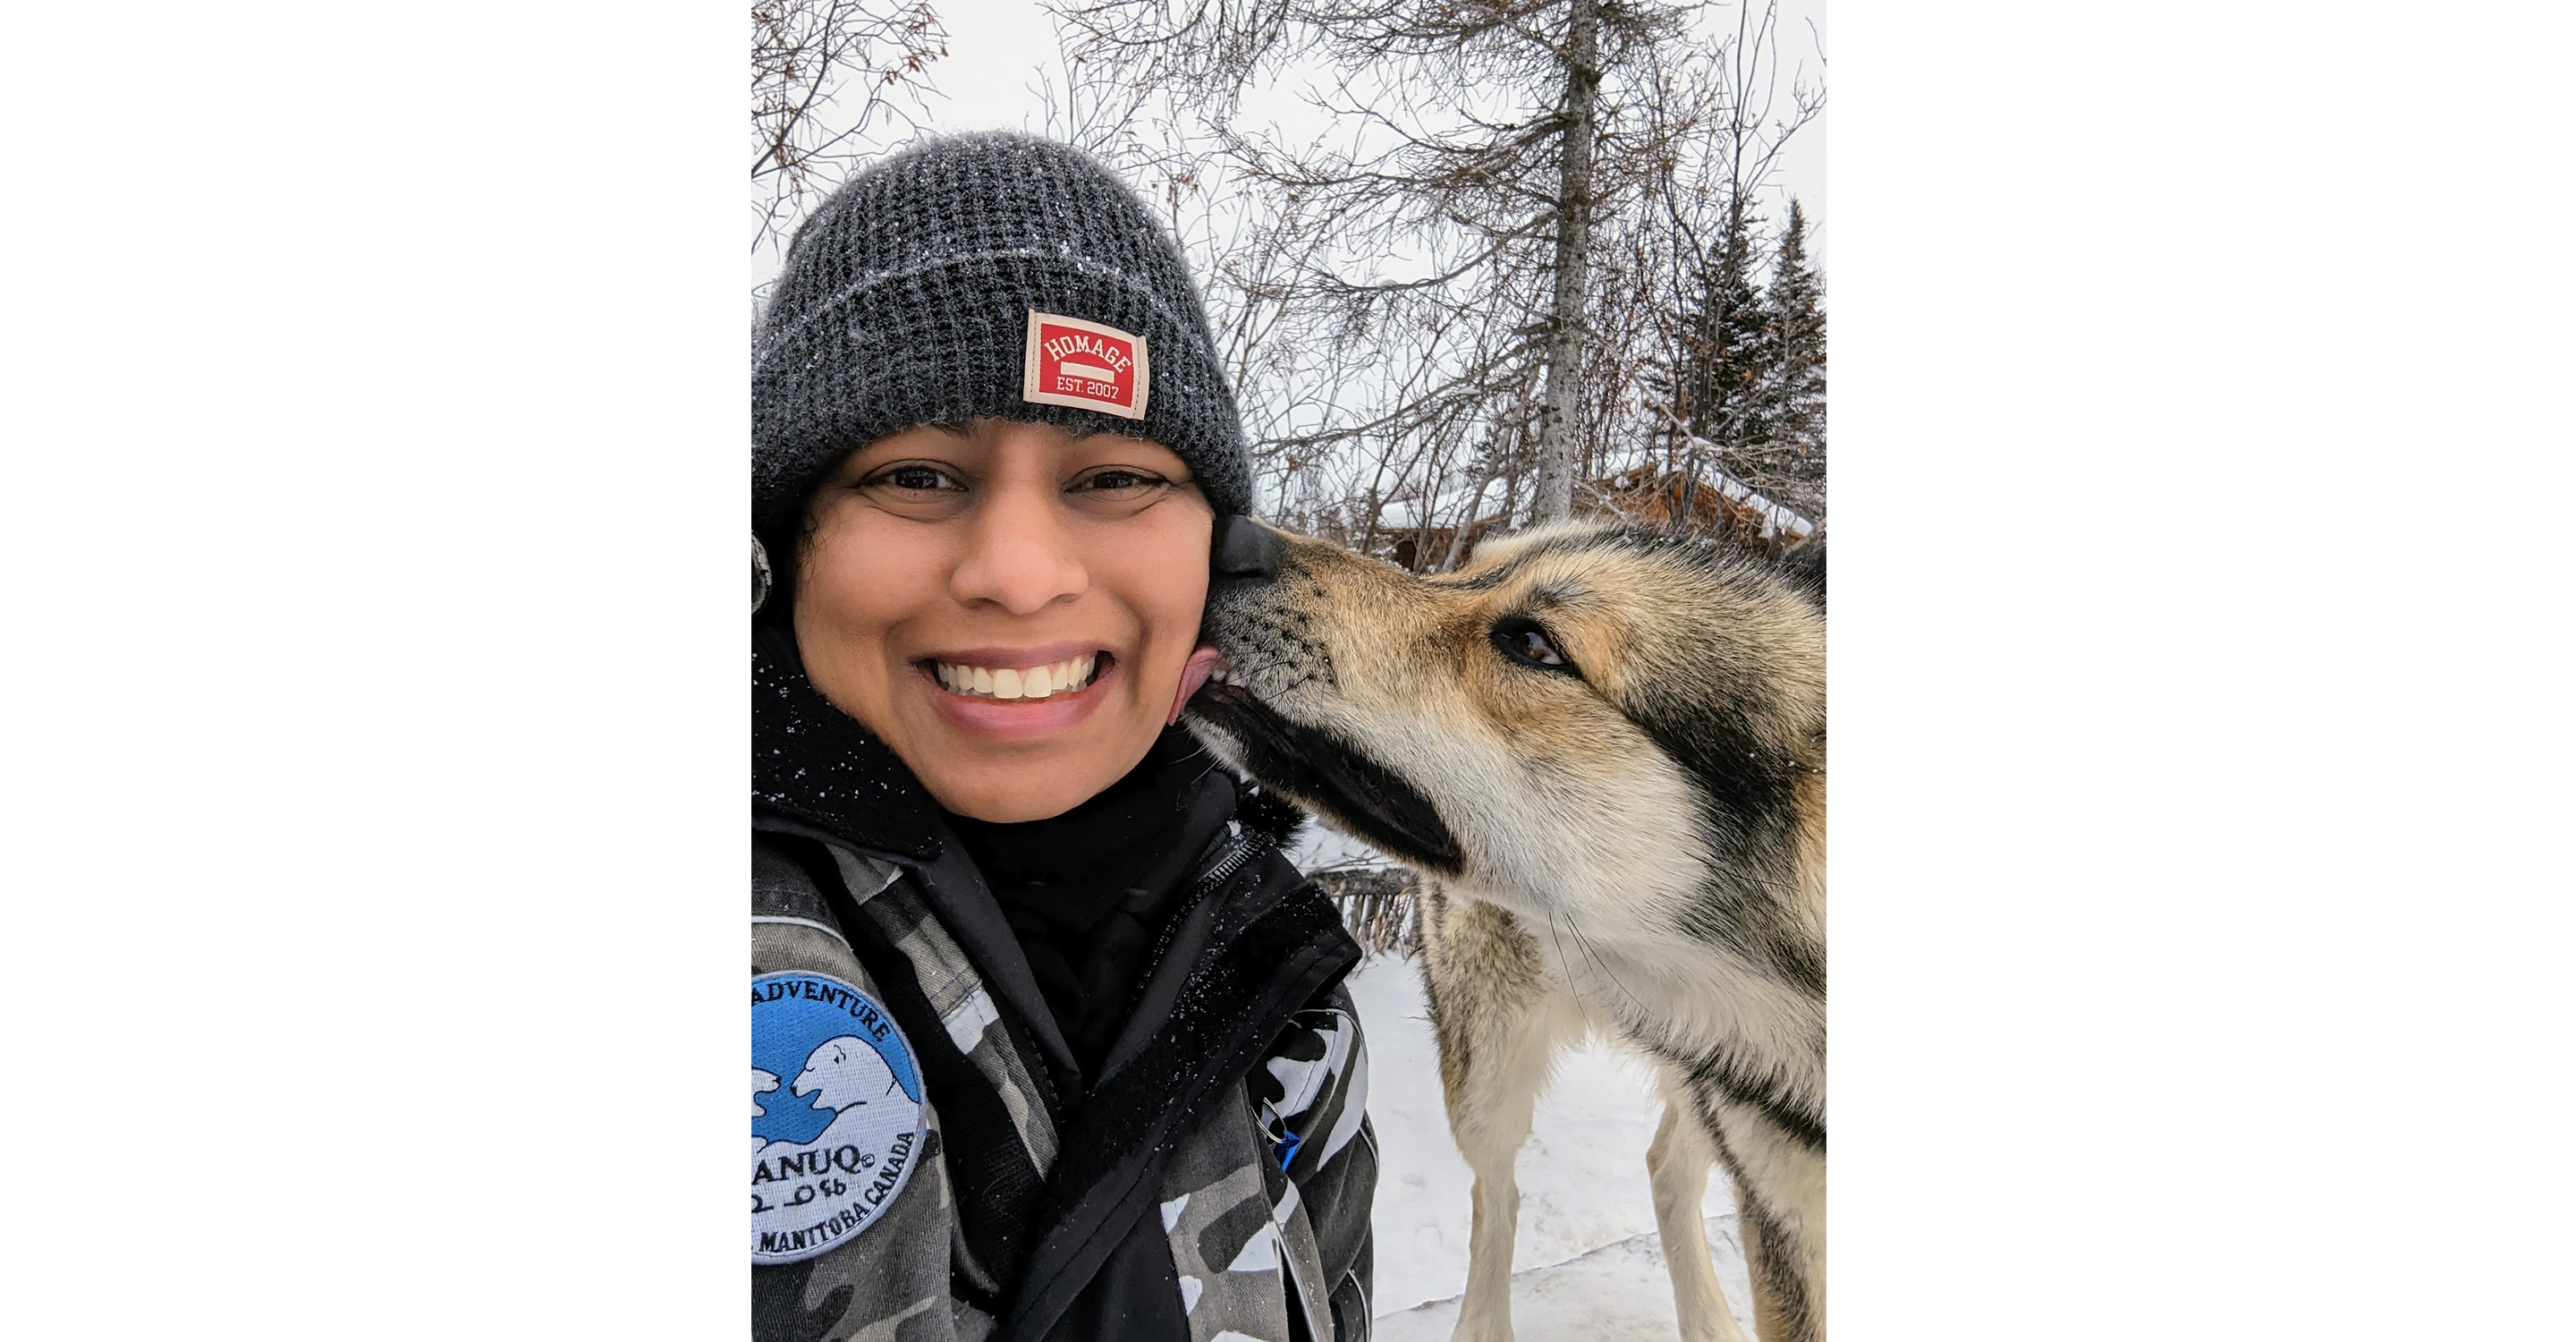 Playing with one of the dogs at Wapusk Adventures, an Indigenous-owned dog sledding/cultural tour company in Churchill, Manitoba, 2023.